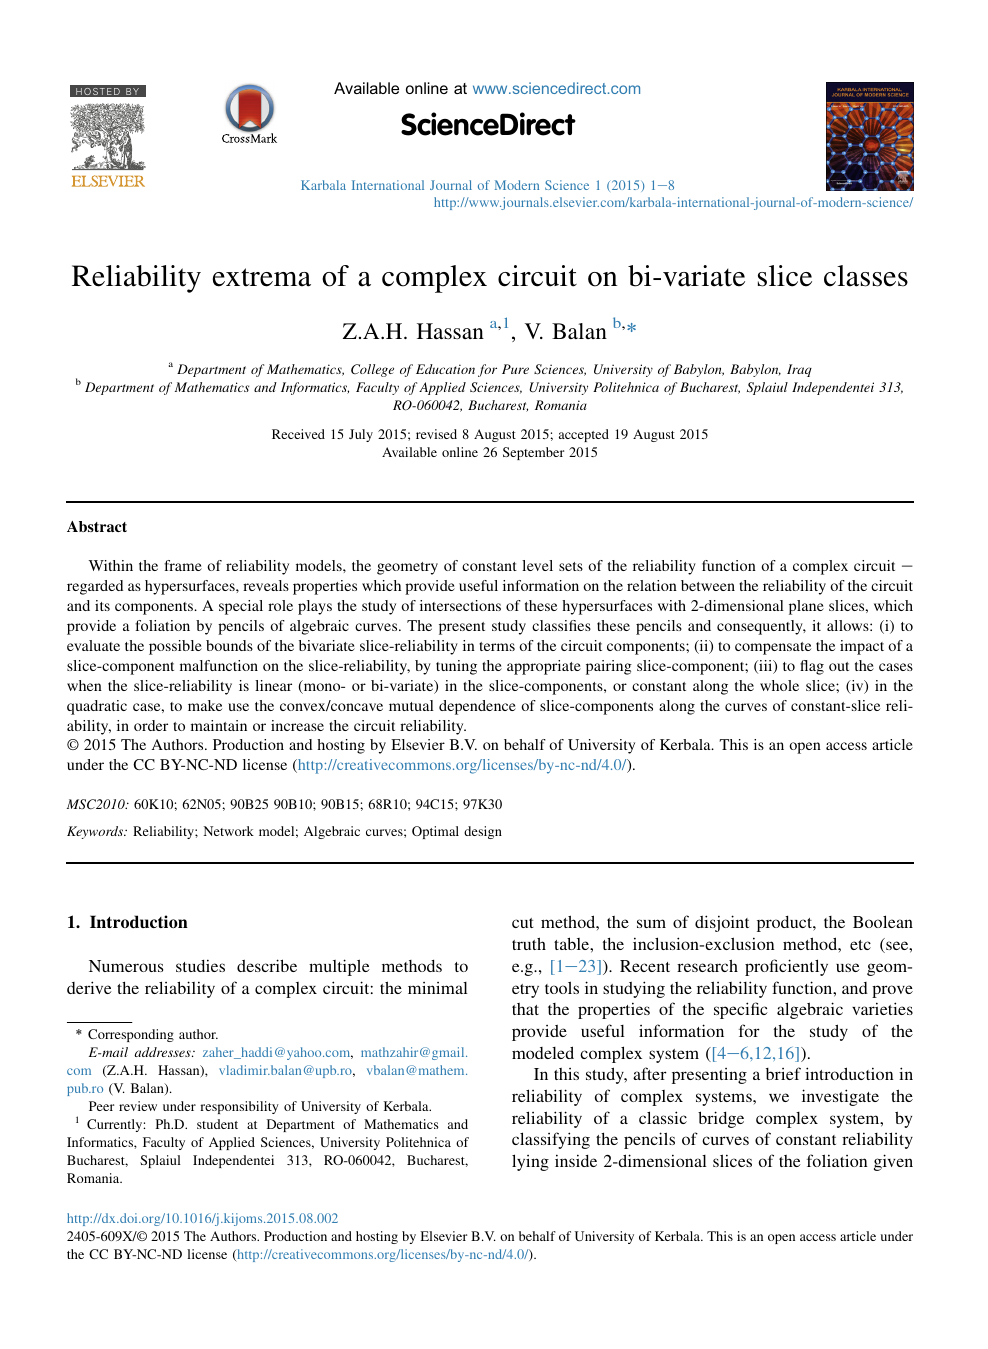 Reliability Extrema Of A Complex Circuit On Bi Variate Slice Classes Topic Of Research Paper In Computer And Information Sciences Download Scholarly Article Pdf And Read For Free On Cyberleninka Open Science